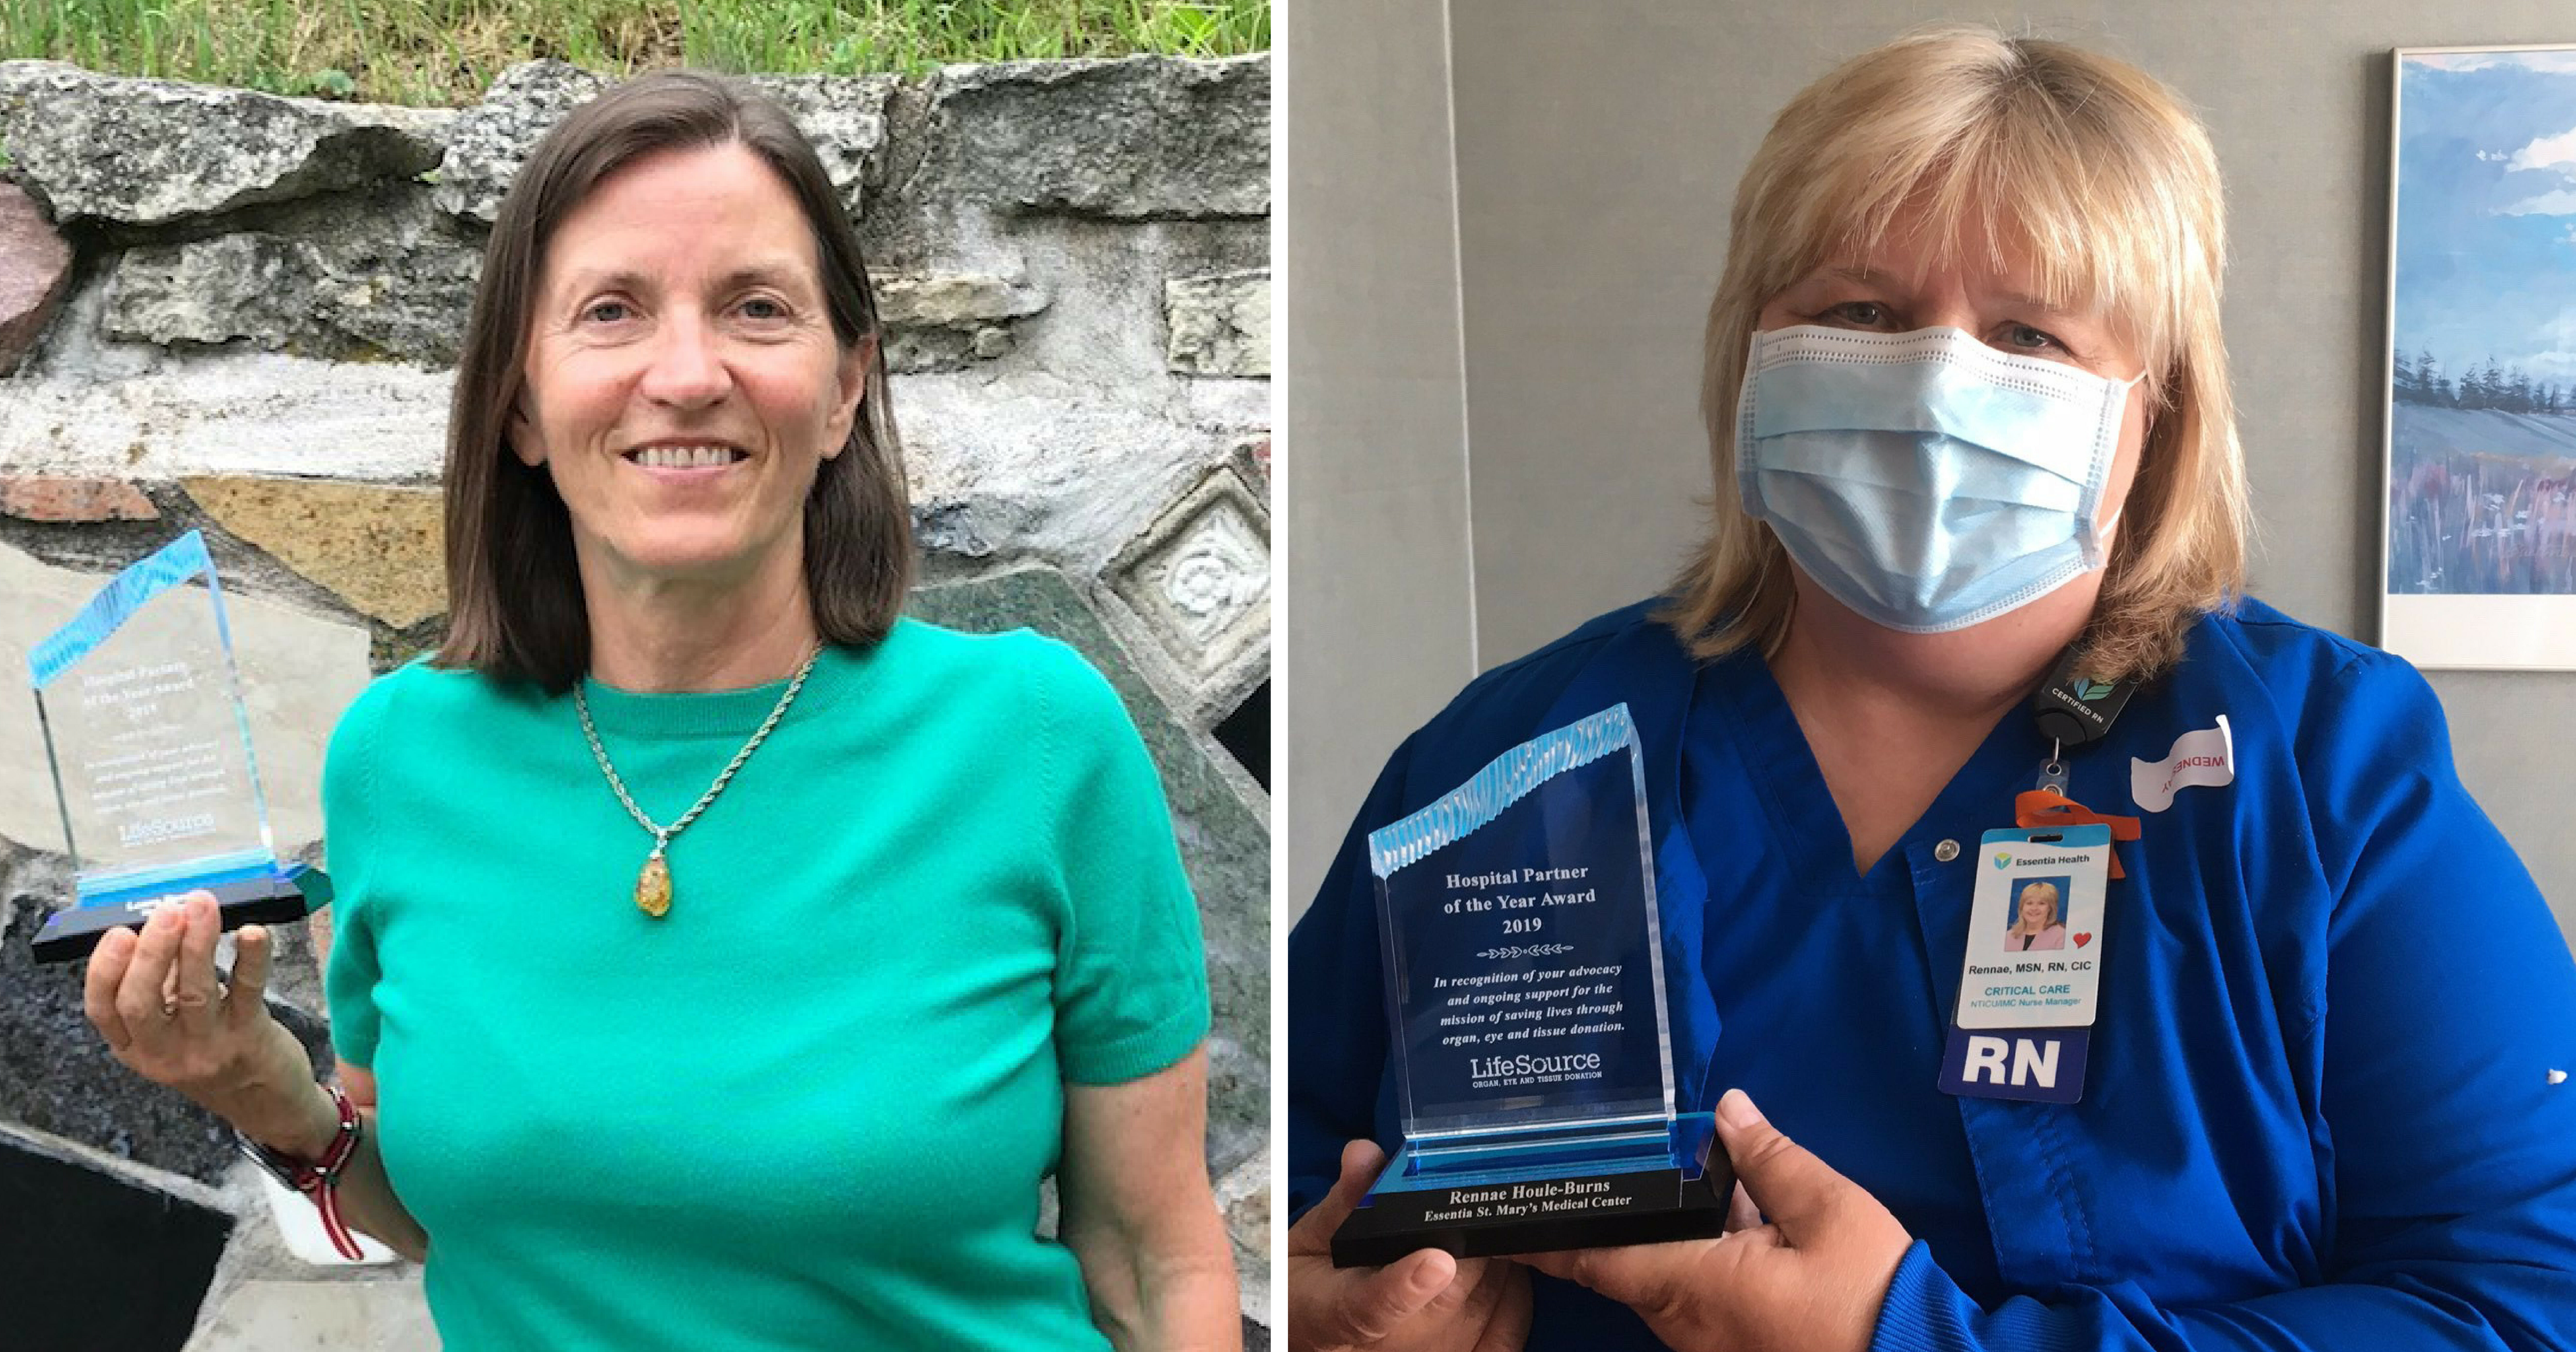 Two women holding glass awards for Hospital Partner of the Year 2019